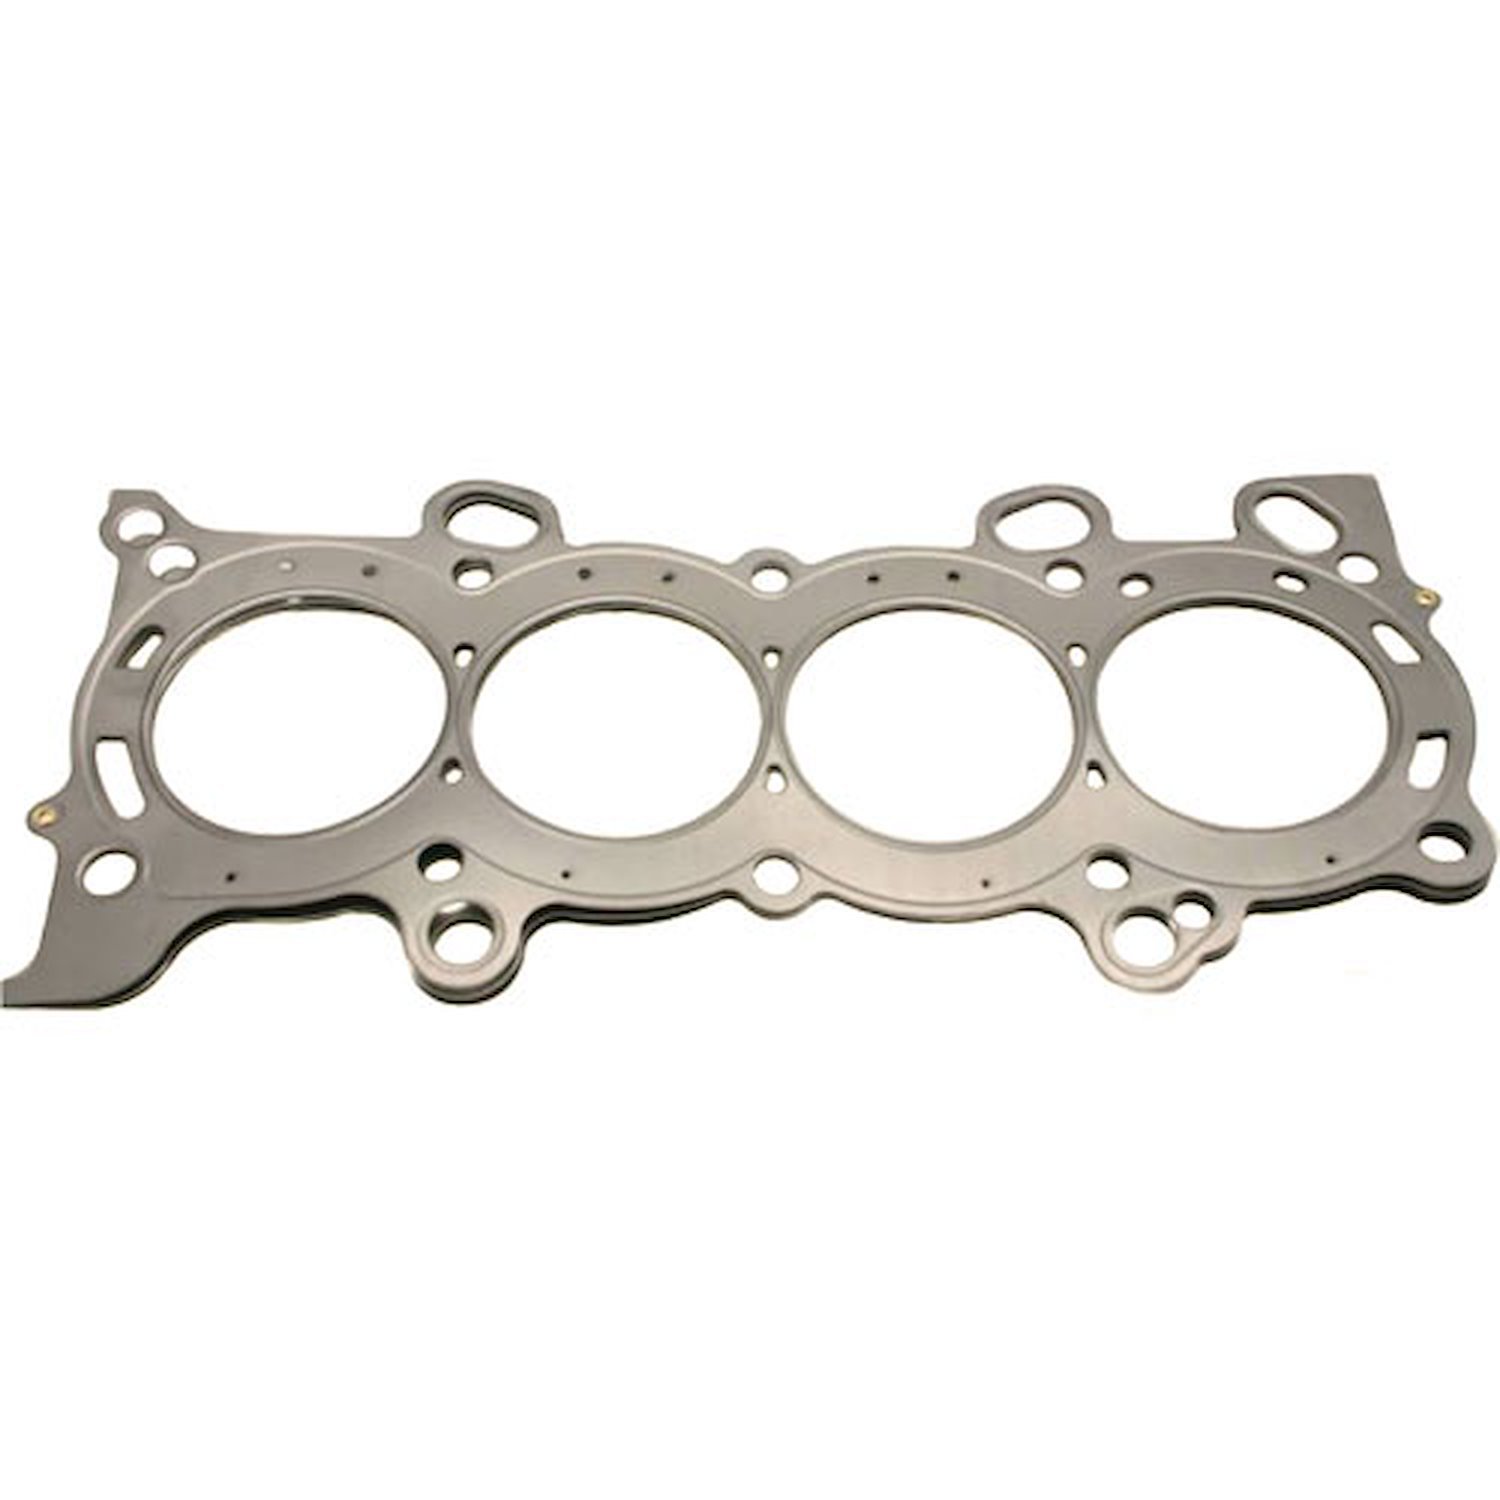 Head Gasket for Select 2002-2006 Acura RSX/Honda Civic, CR-V with K20A, K20A3, K20Z1, K24A1 Engines